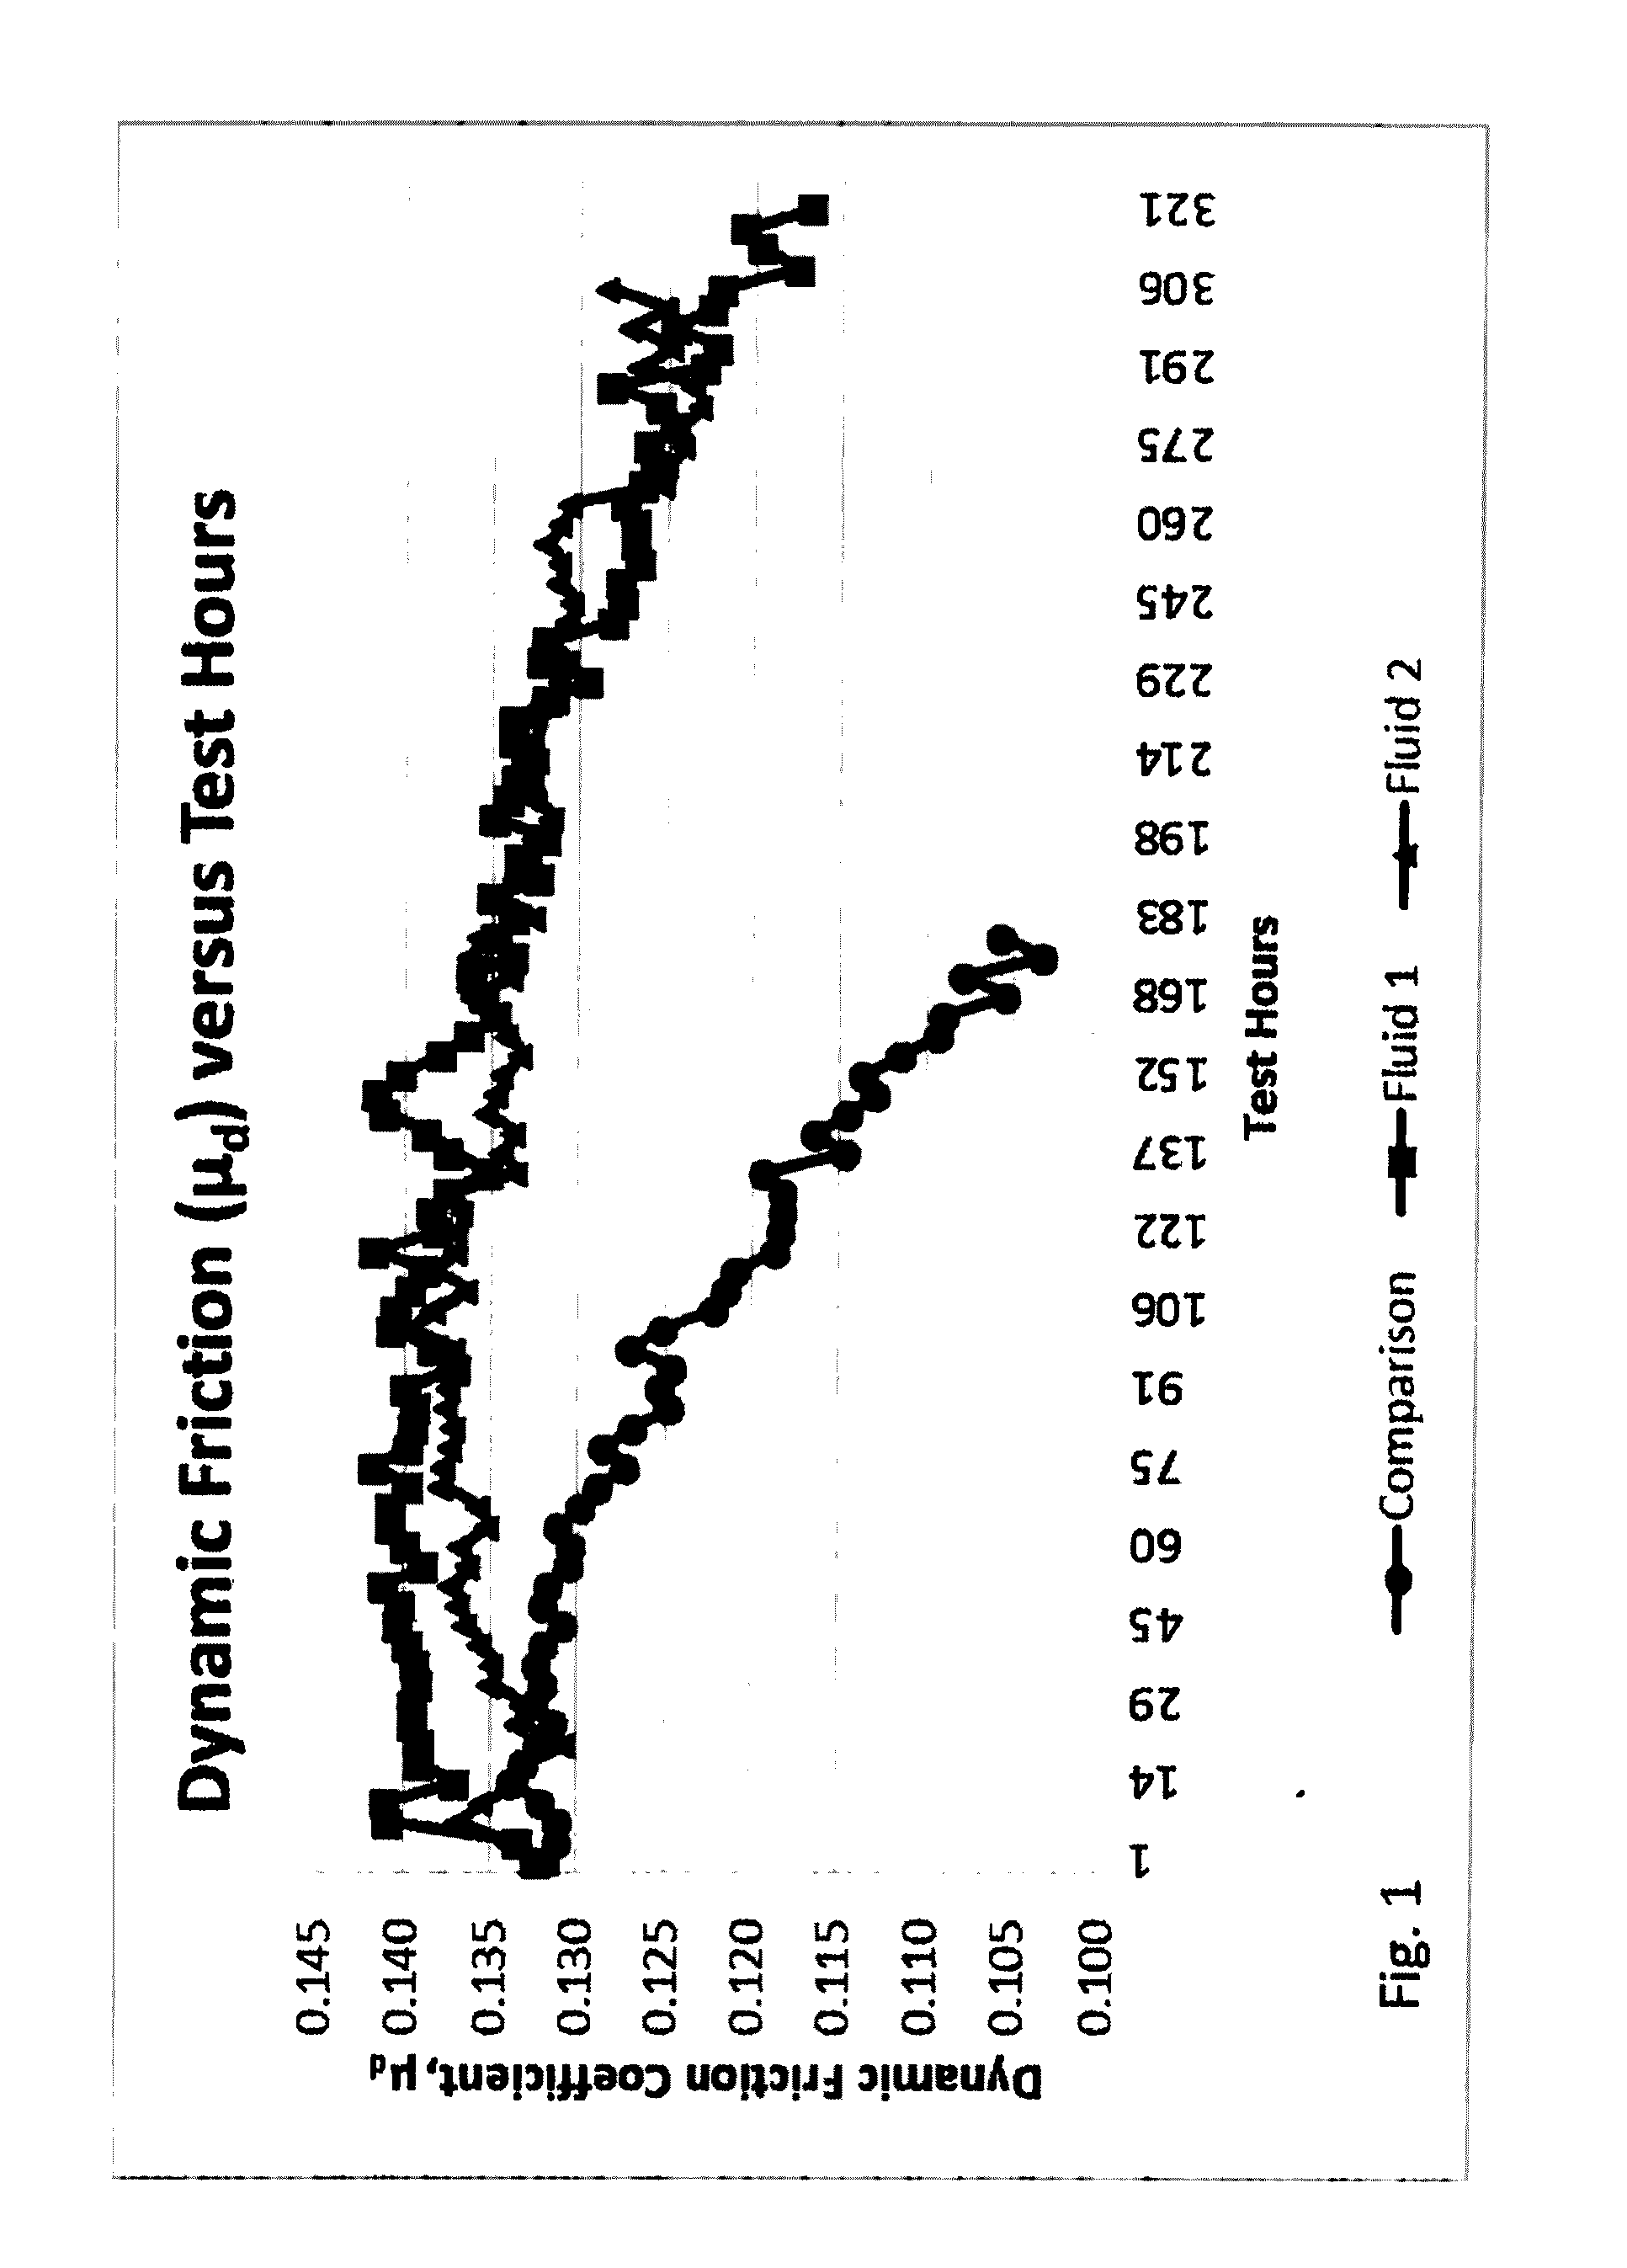 Method of improving vehicle transmission operation through use of specific lubricant compositions